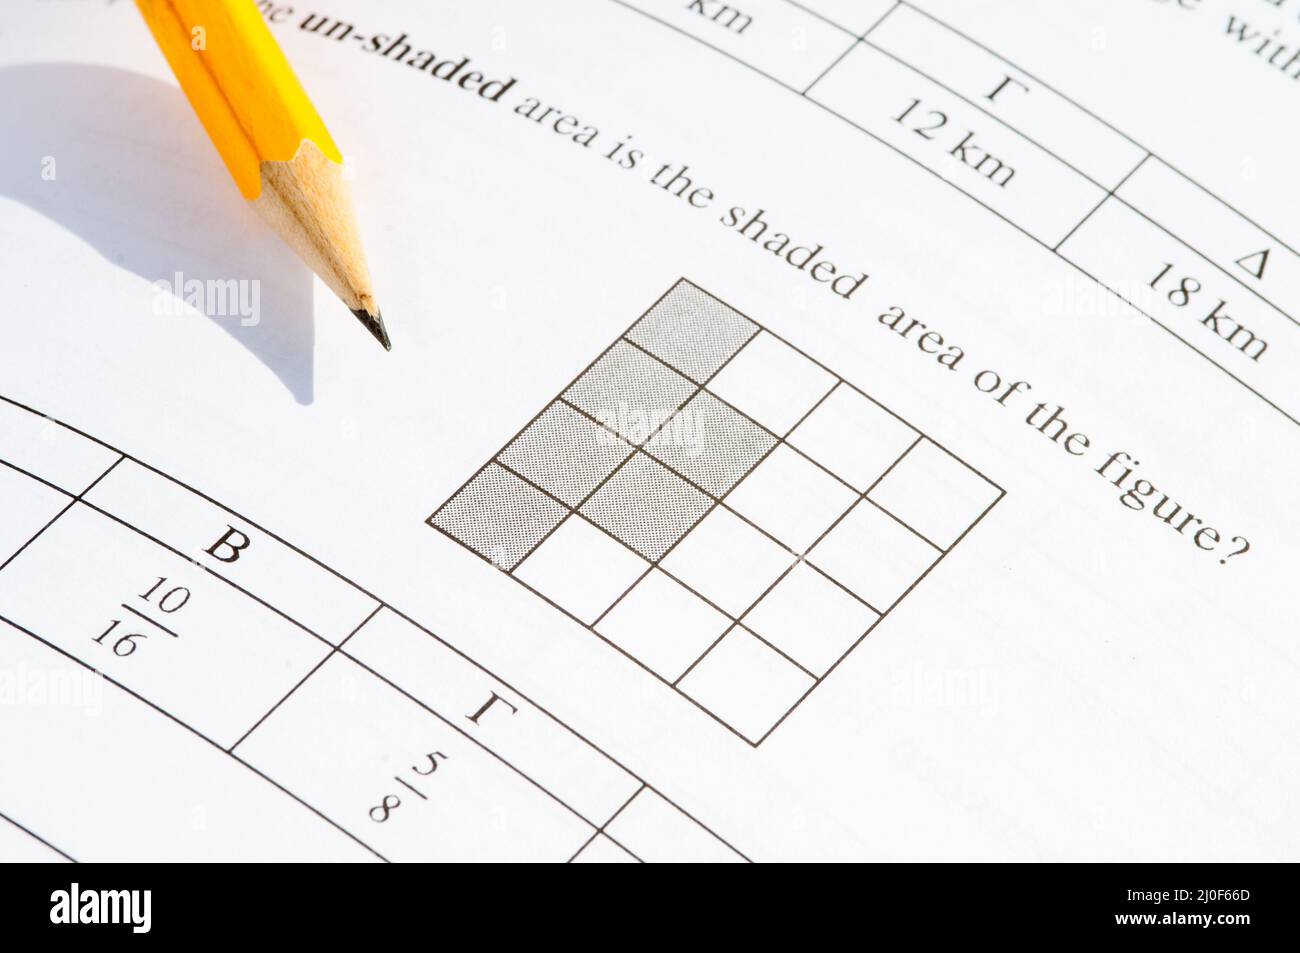 Mathematics problem solving with exam paper questions. Stock Photo